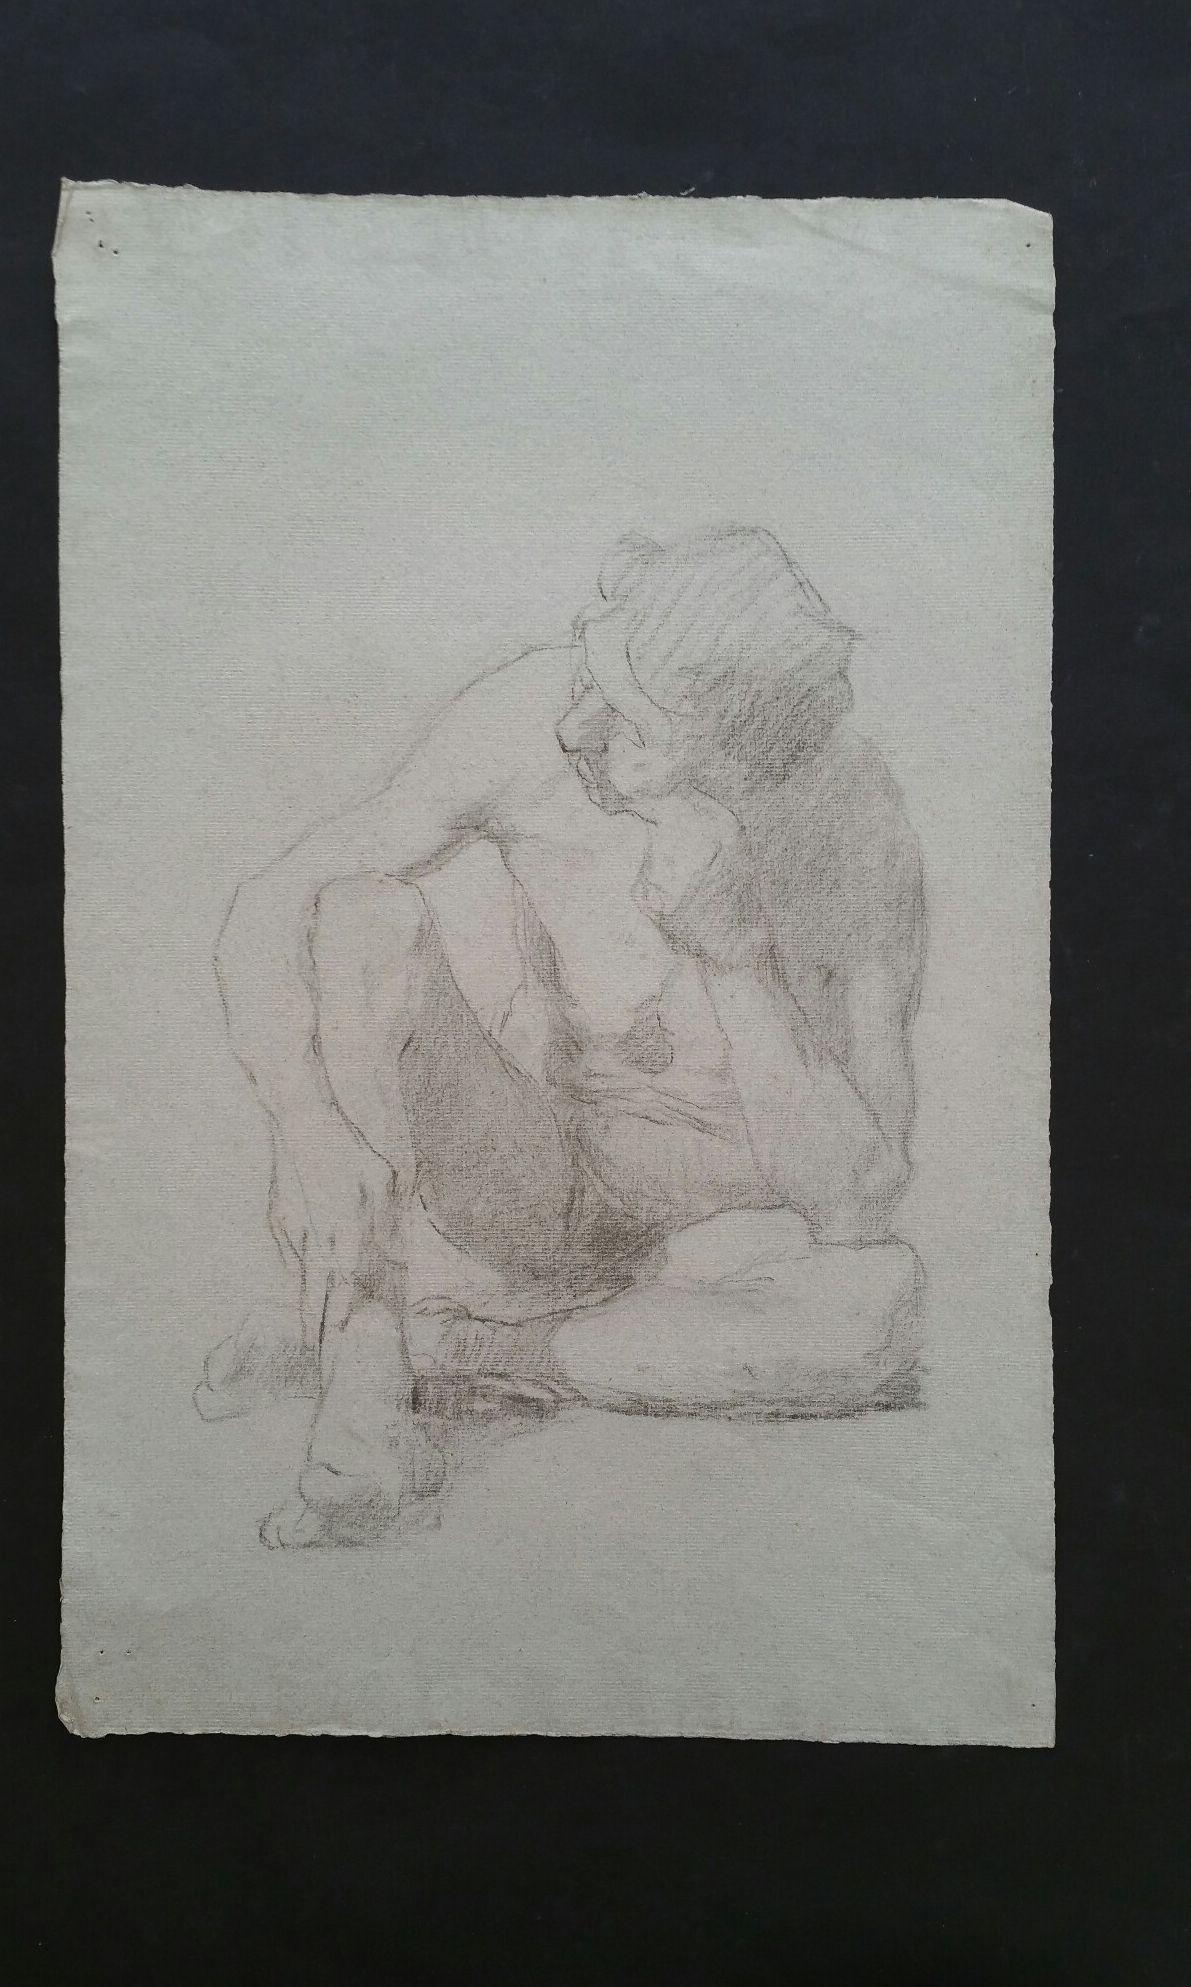 English graphite sketch of a male nude, seated.
by Henry George Moon (British 1857-1905).
on pale grey artists paper, unframed.
measurements: sheet 18.75 x 12 inches.

Provenance: from the artists estate

Condition report: pin holes to